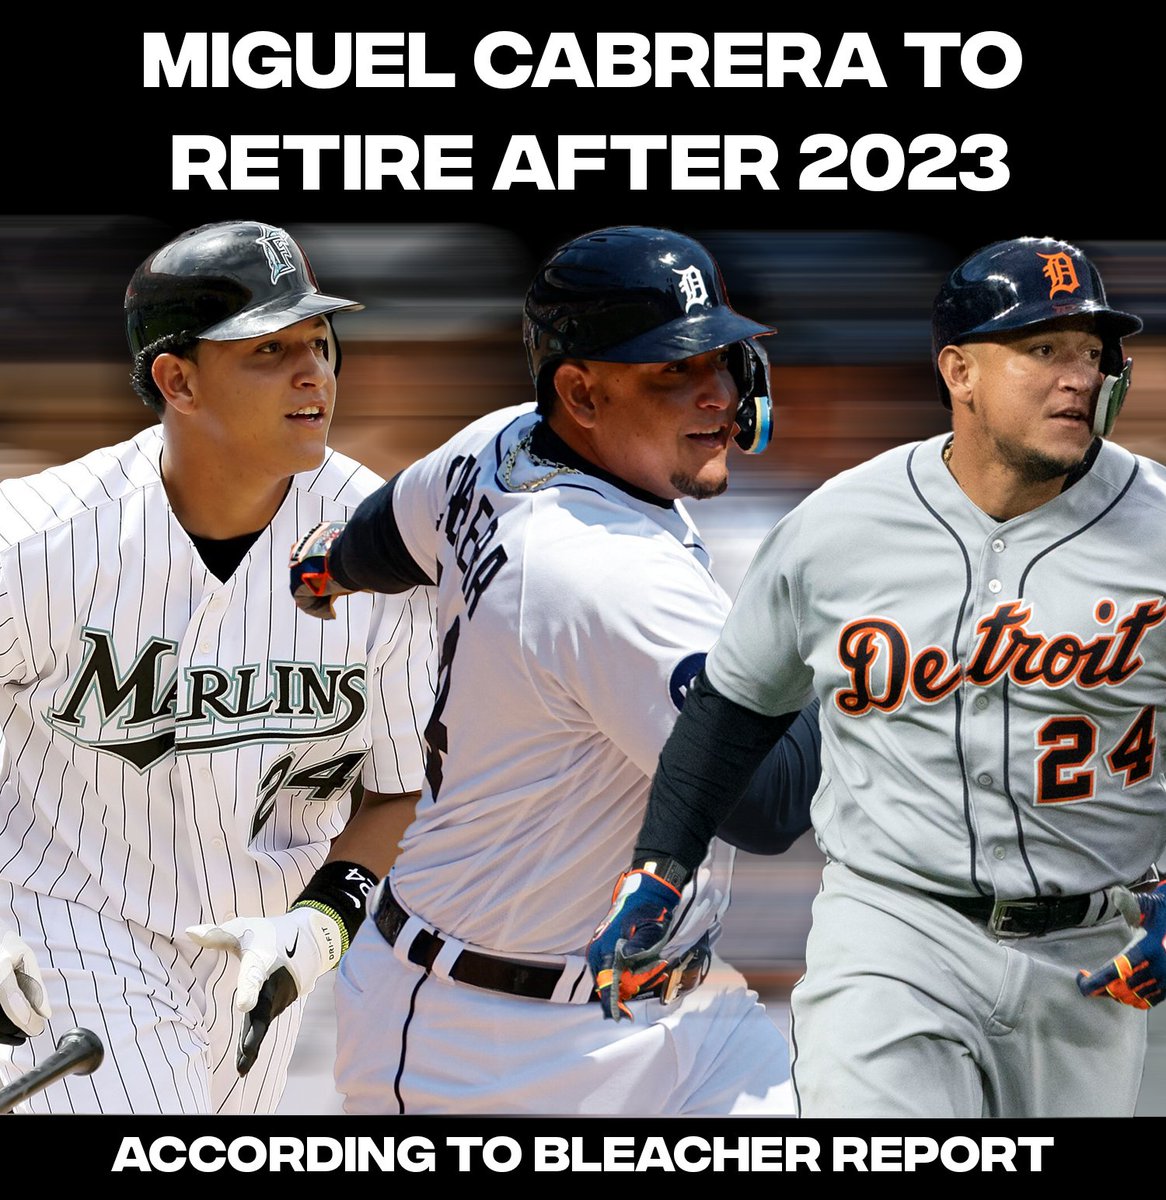 Another legend is set to retire after the 2023 season👑 Miguel Cabrera has 2 AL MVP's, as well as a World Series Ring from 2003. #betterthanyesterday